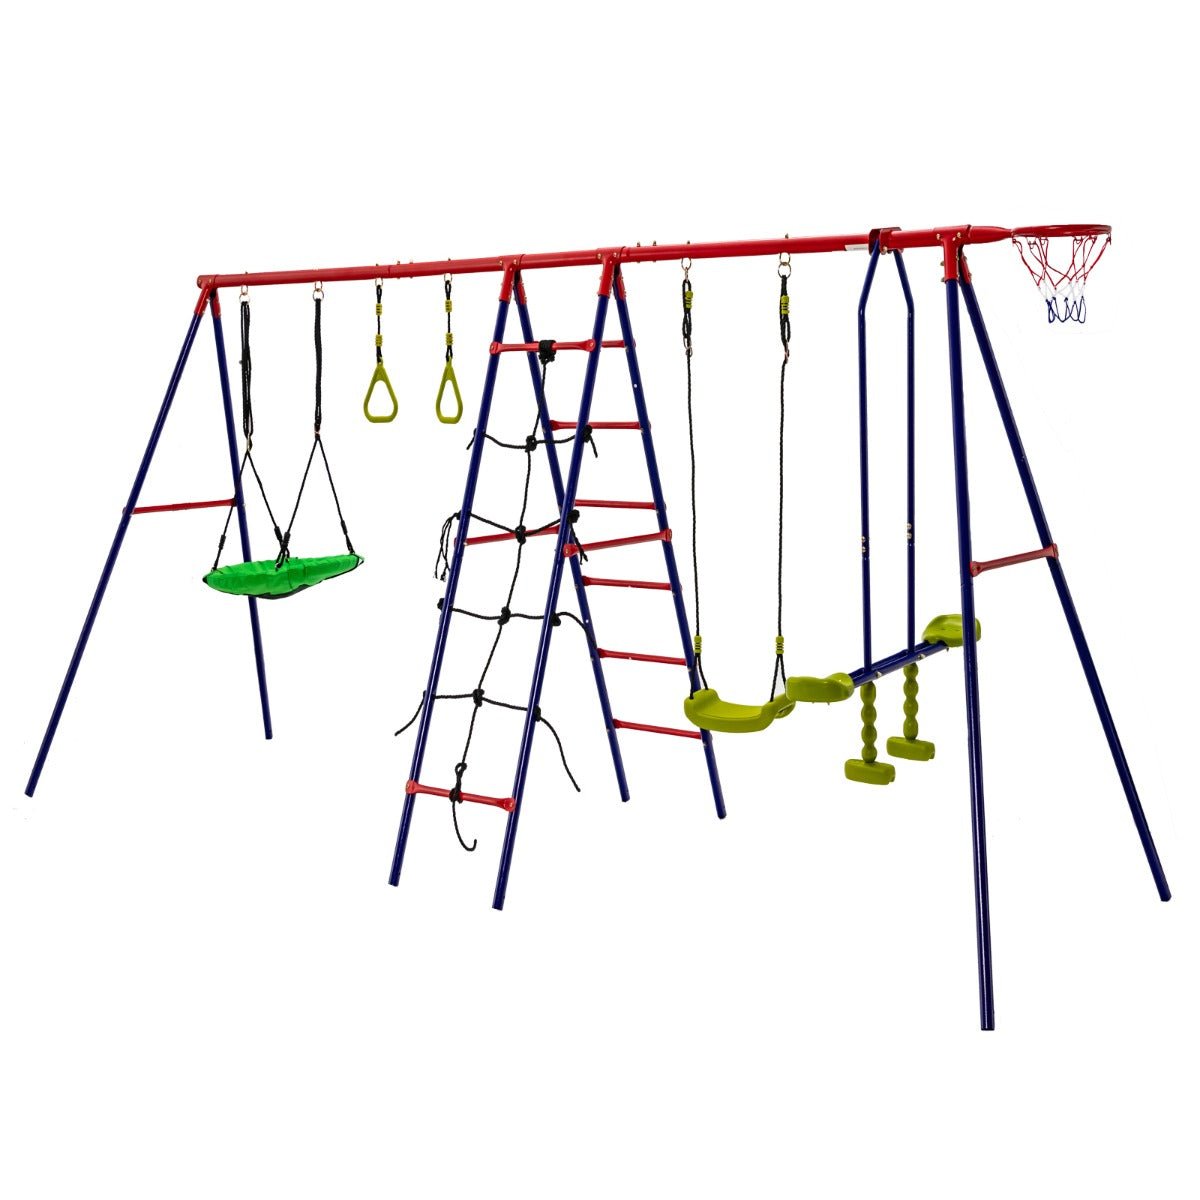 Kids Outdoor Swing Set: Climbing Ladder for Thrilling Play